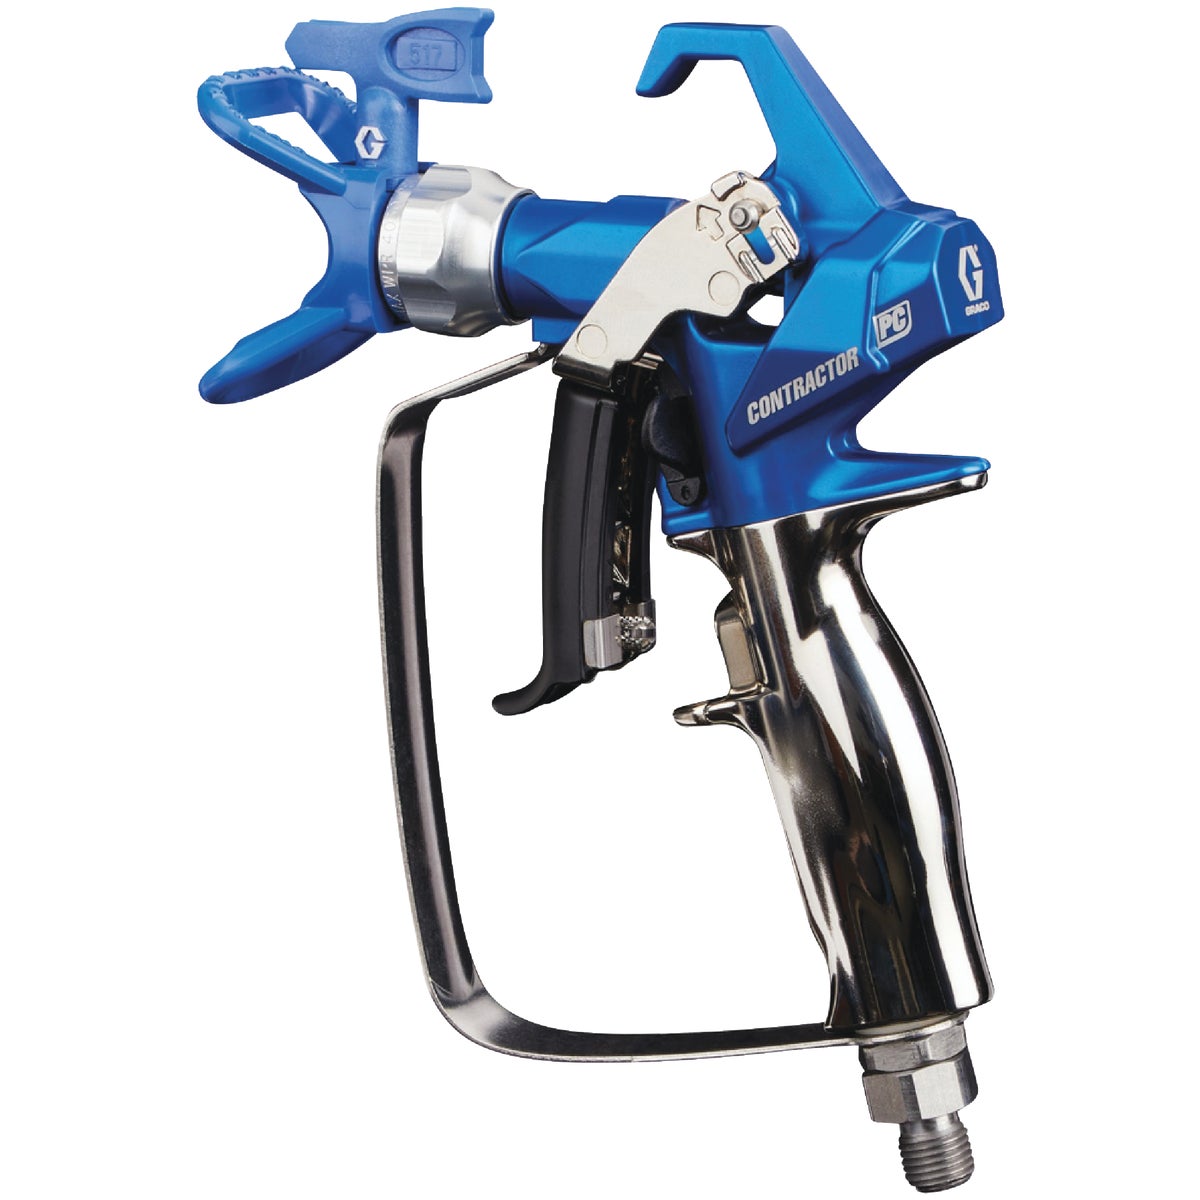 Graco Contractor PC Airless Spray Gun with RAC X 517 SwitchTip